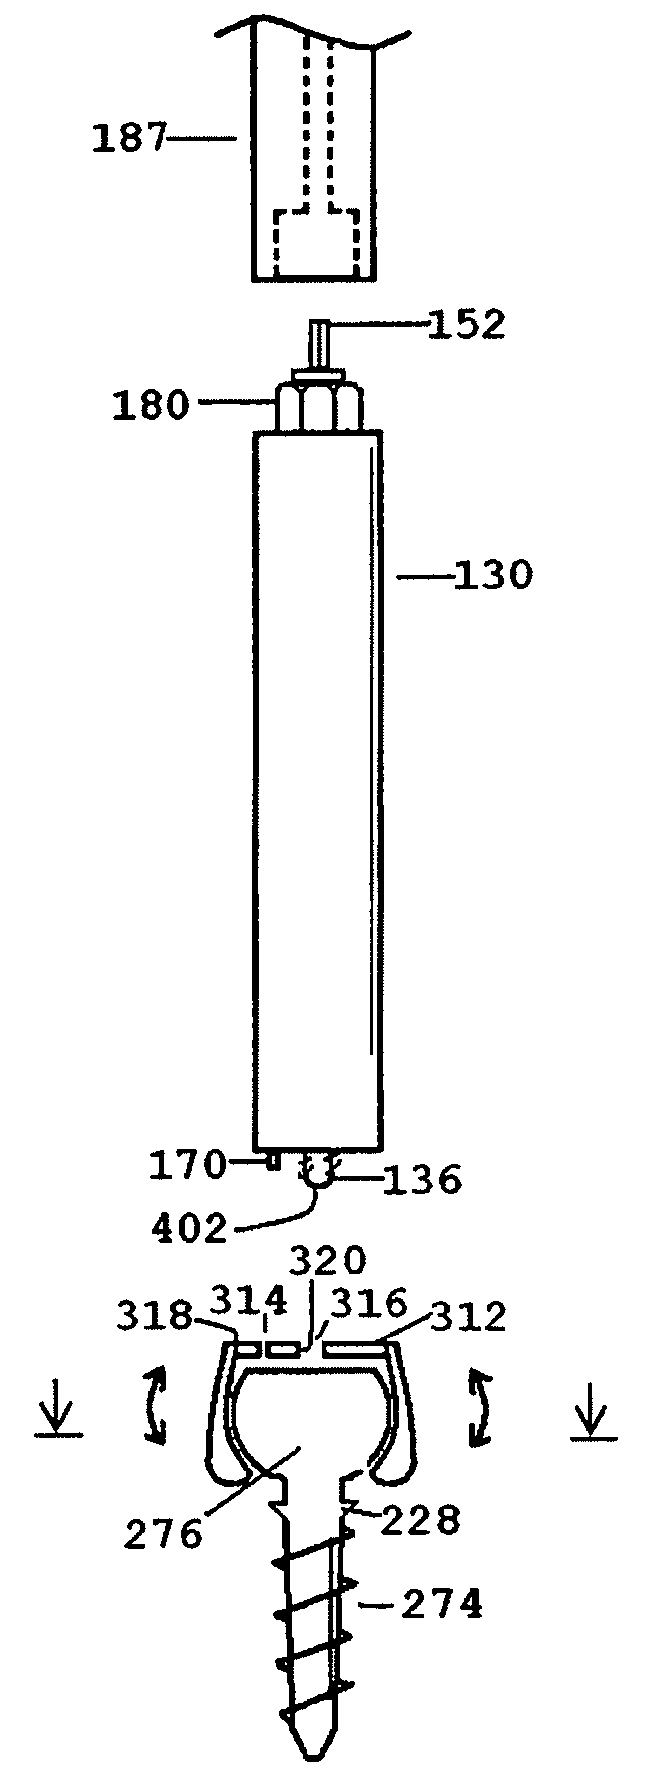 Distraction screw for skeletal surgery and method of use